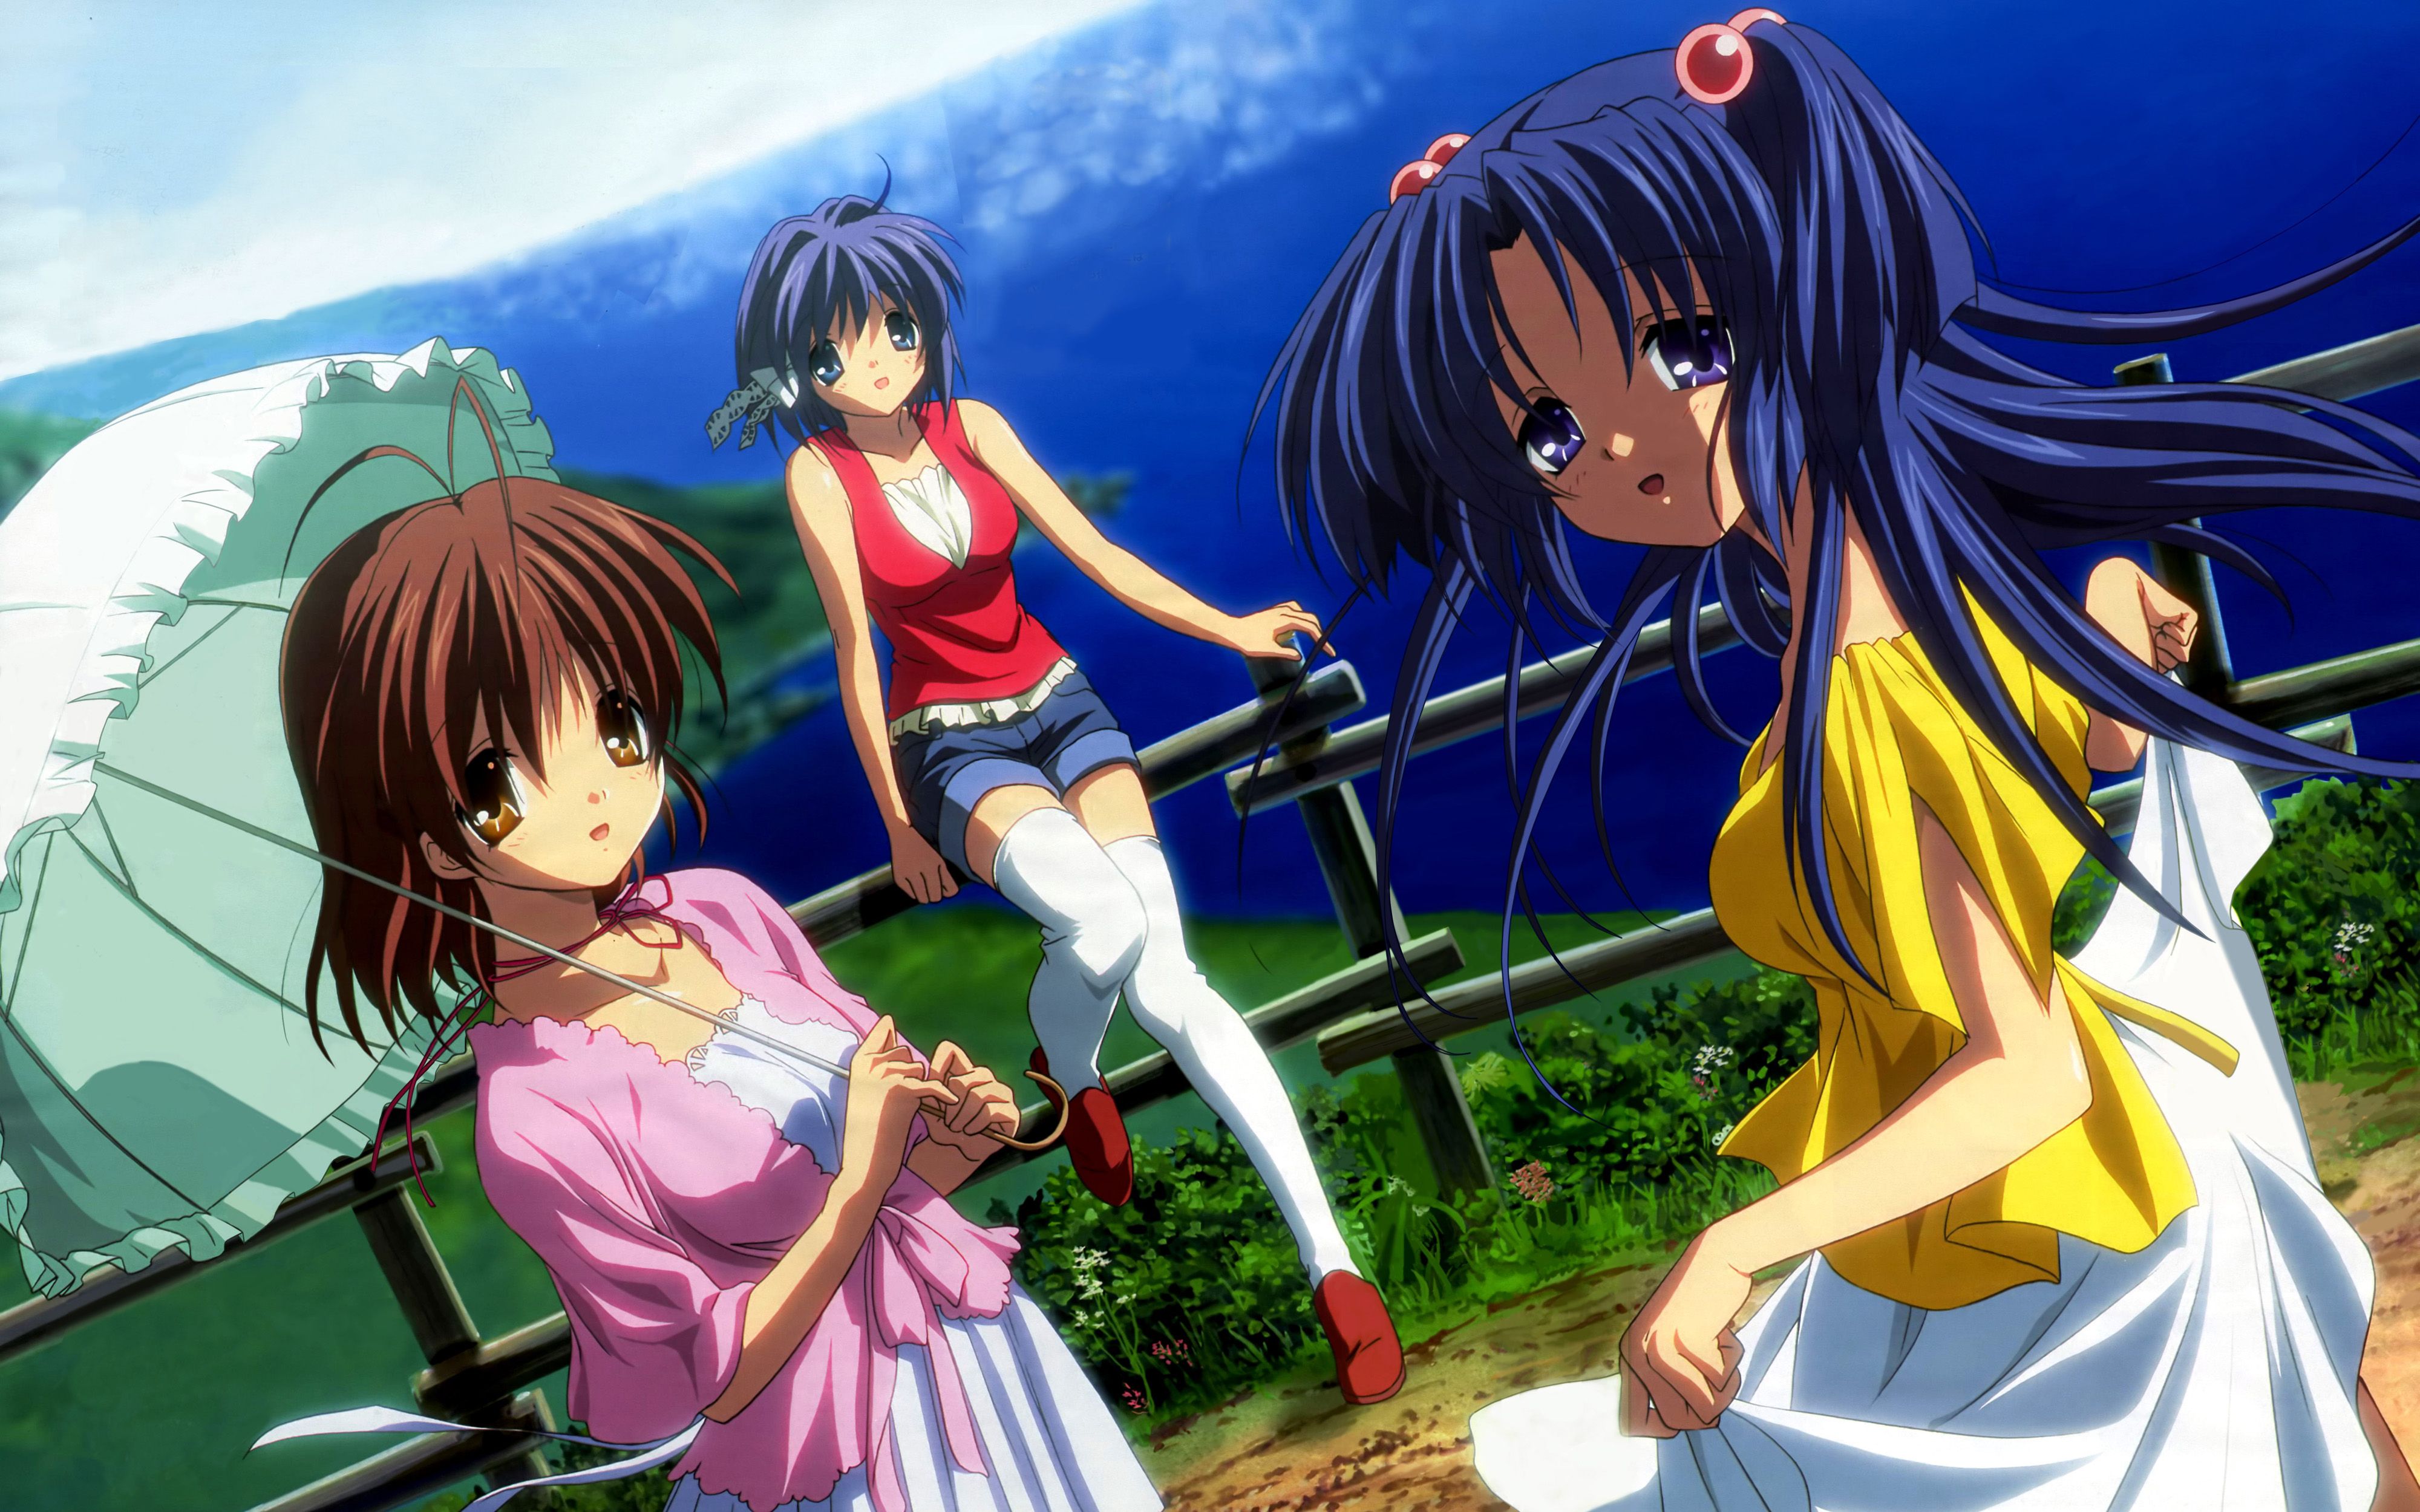 clannad pc download